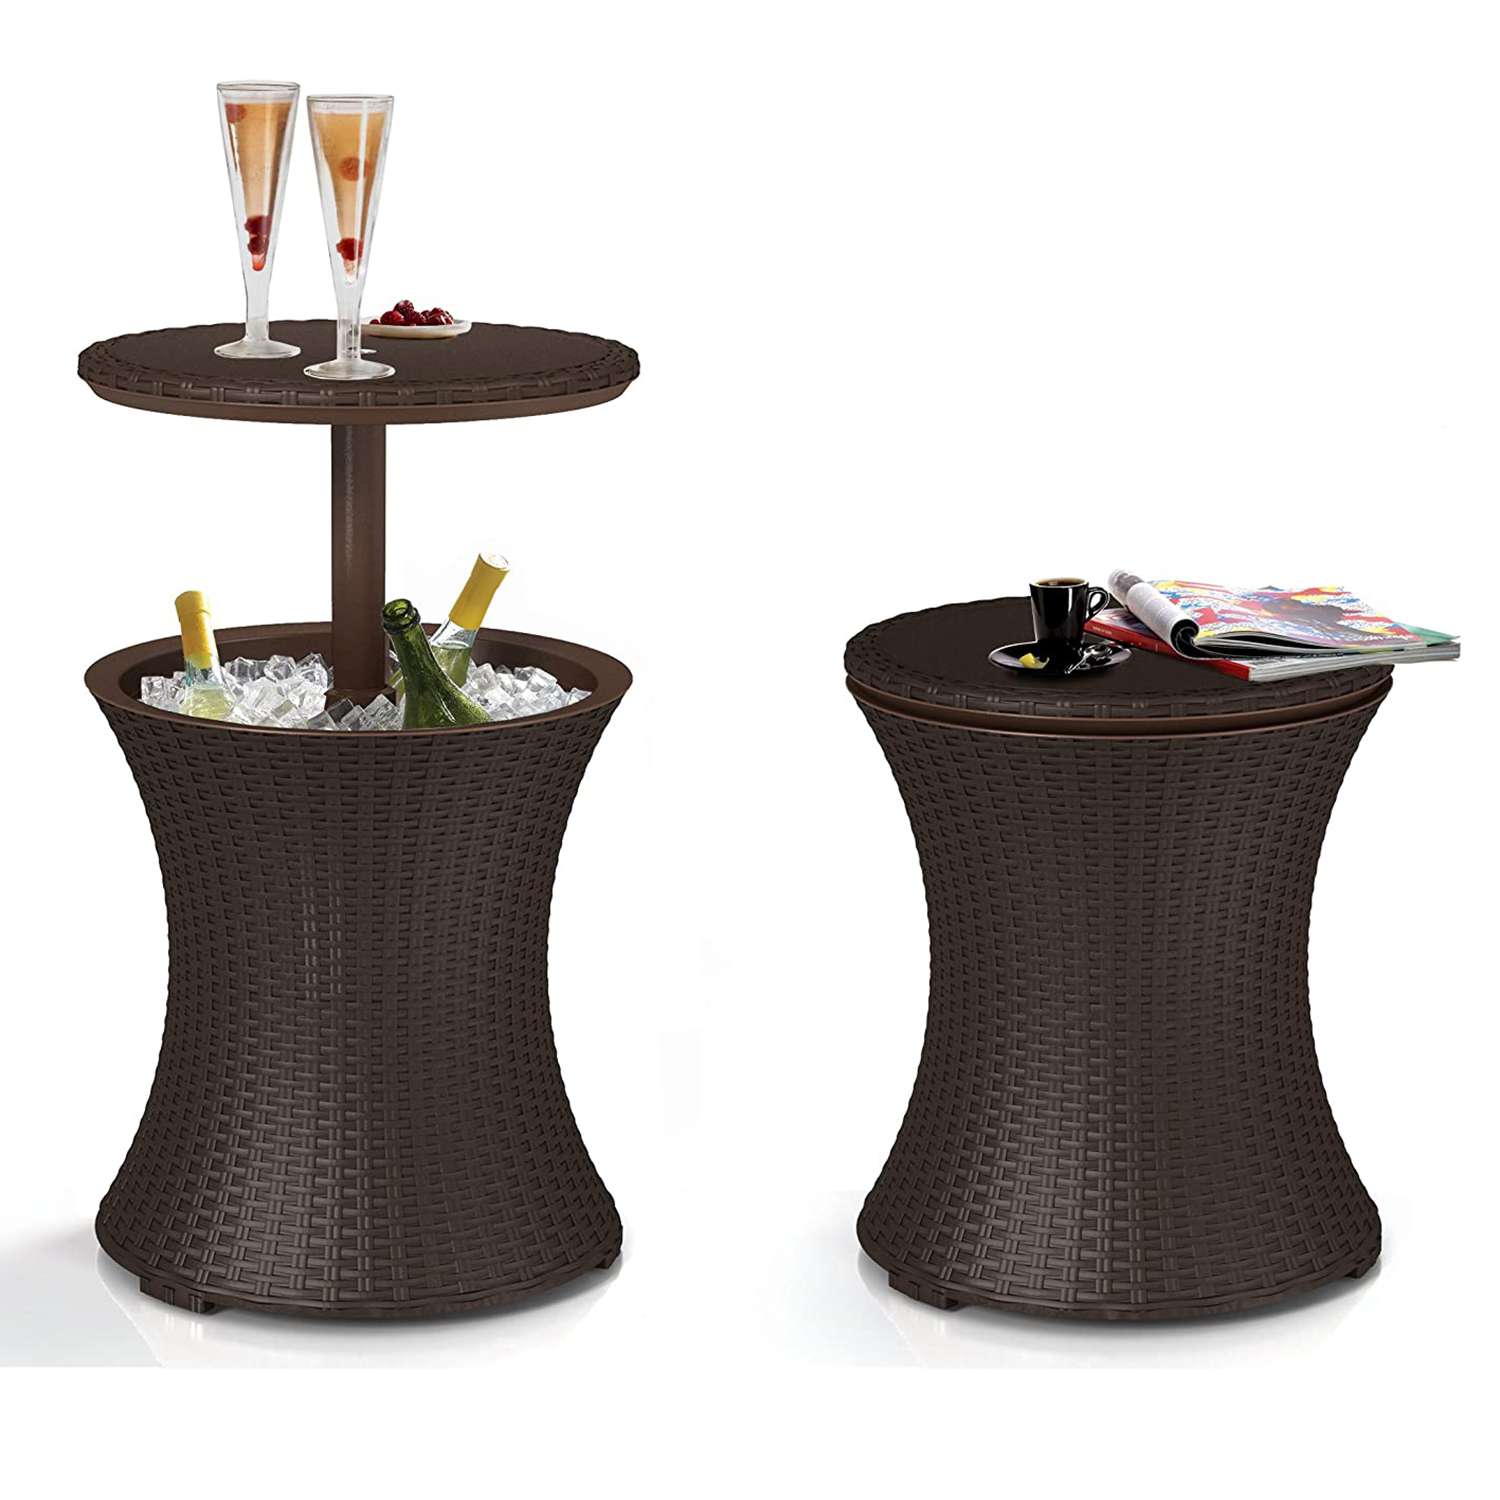 Keter Pacific Cool Bar Outdoor Patio Furniture and Hot Tub Side Table